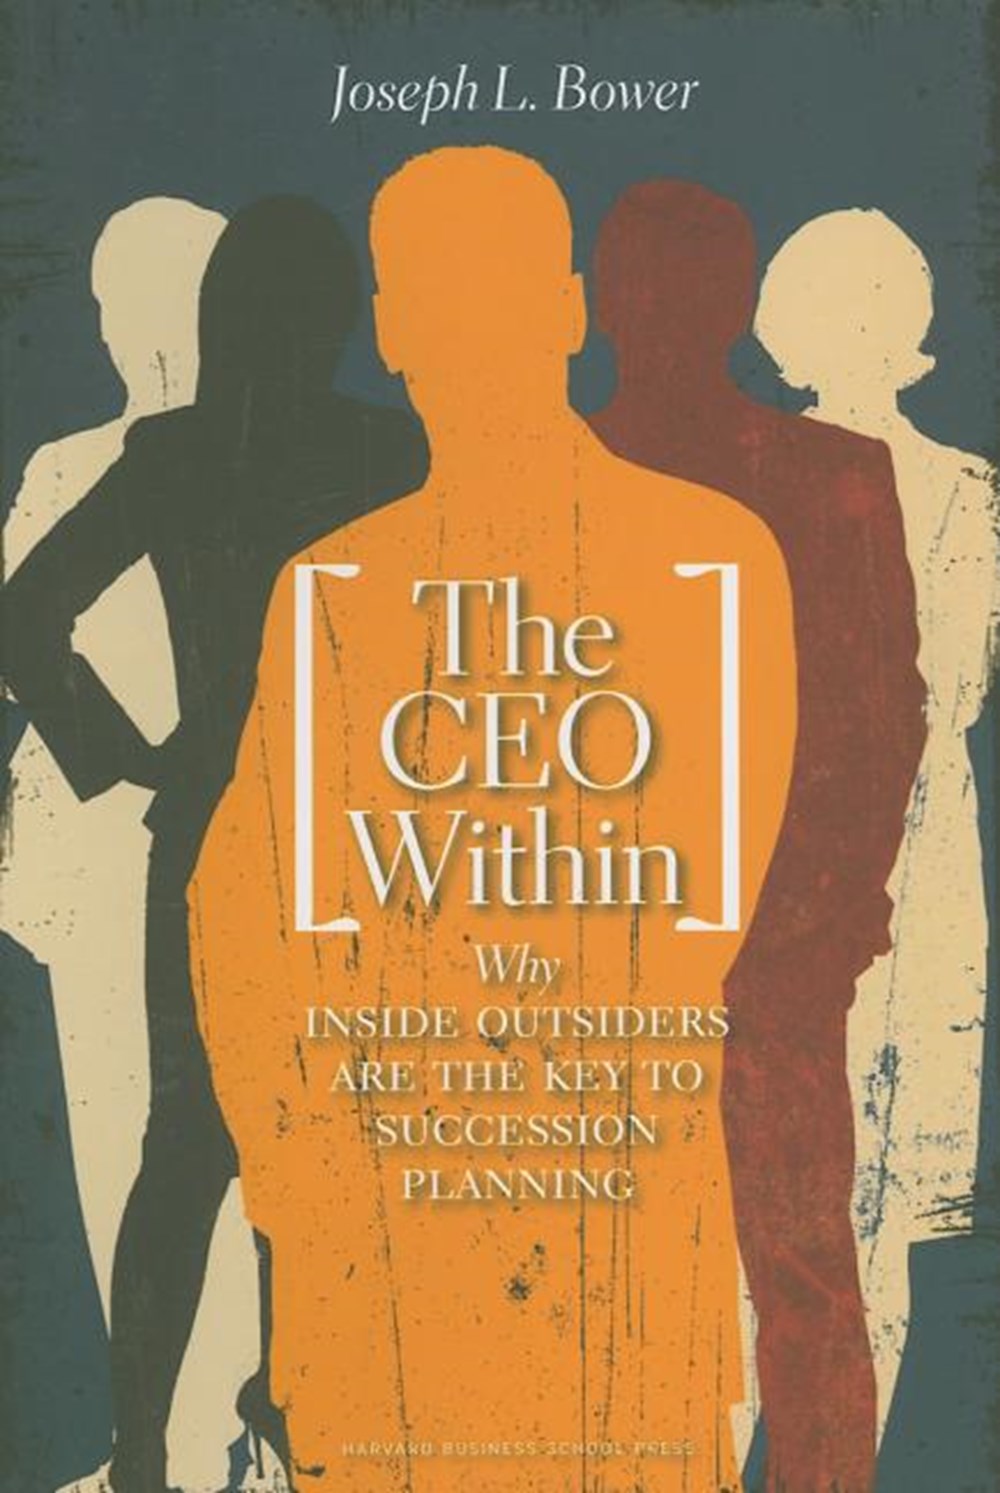 CEO Within Why Inside Outsiders Are the Key to Succession